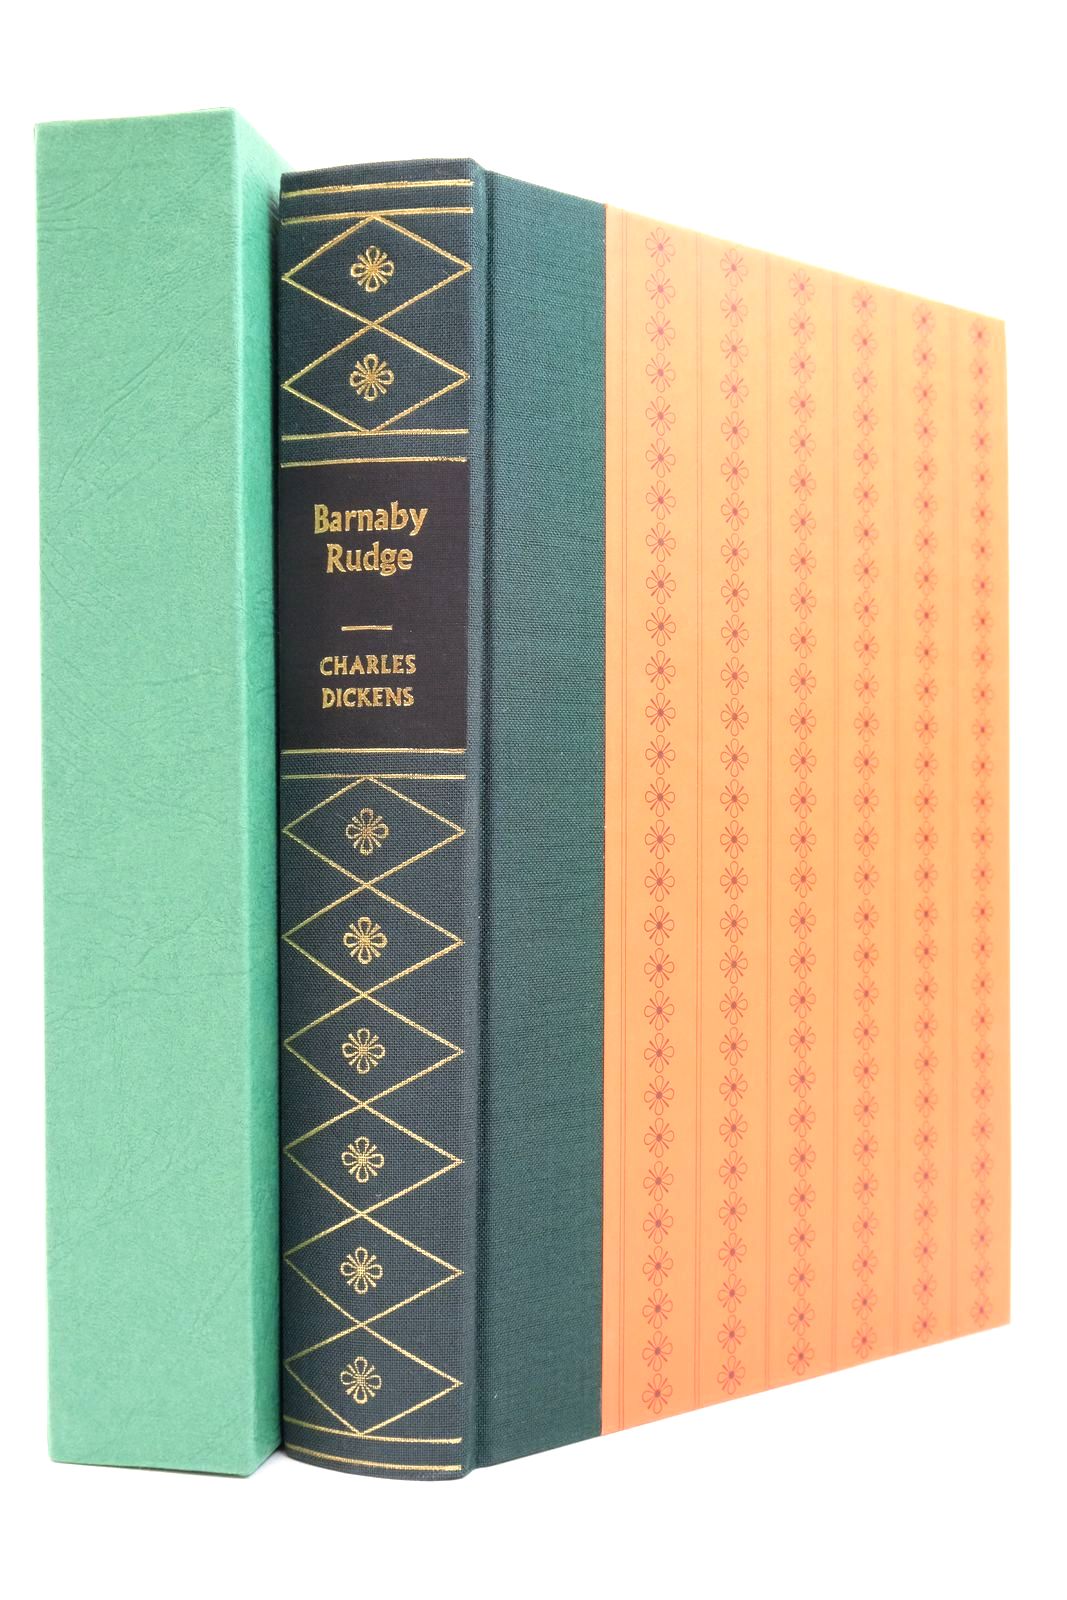 Photo of BARNABY RUDGE A TALE OF THE RIOTS OF 'EIGHTY written by Dickens, Charles illustrated by Keeping, Charles published by Folio Society (STOCK CODE: 2138519)  for sale by Stella & Rose's Books